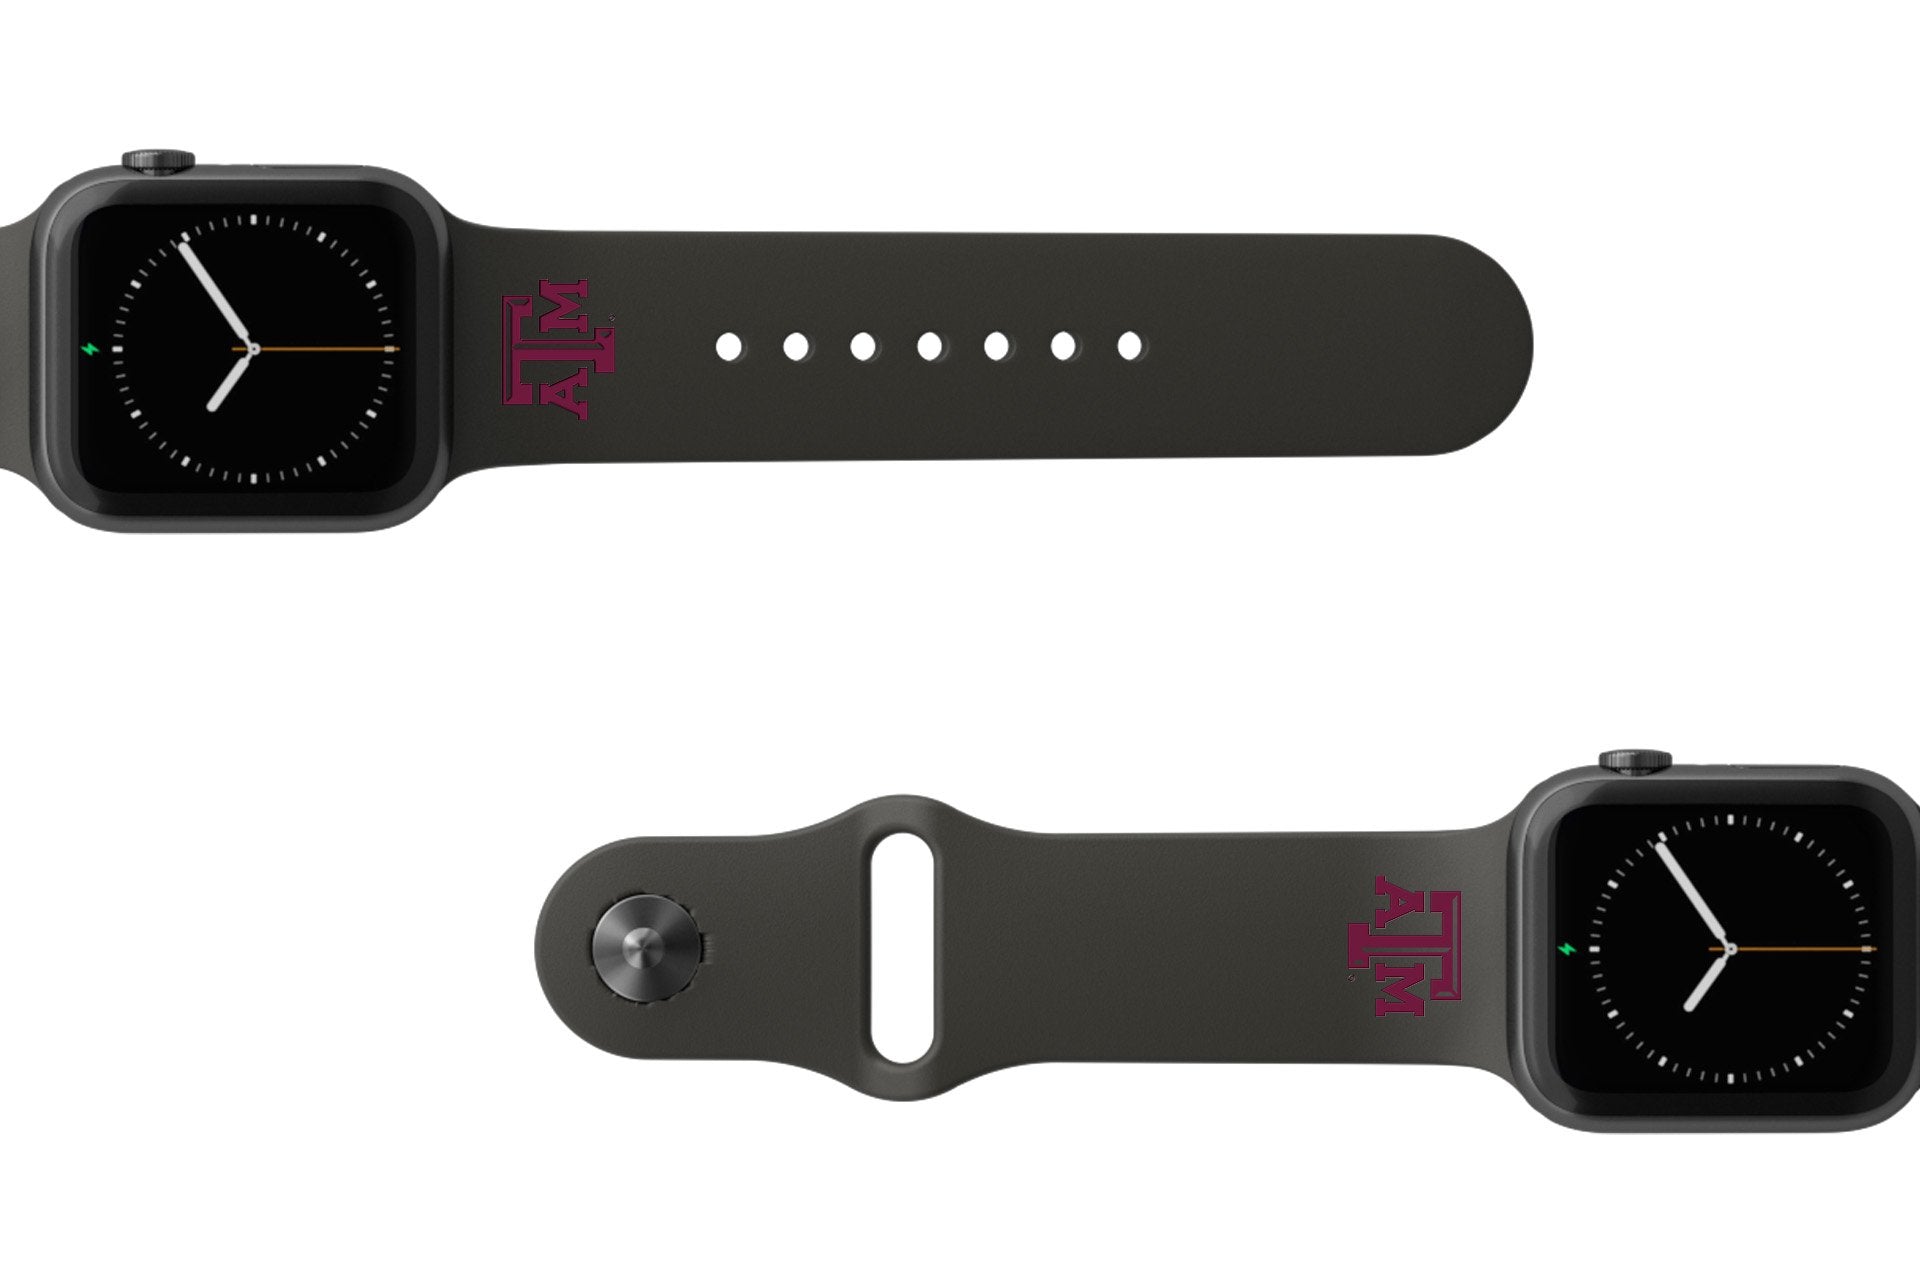 College Texas A&M Black apple watch band with gray hardware viewed from rear